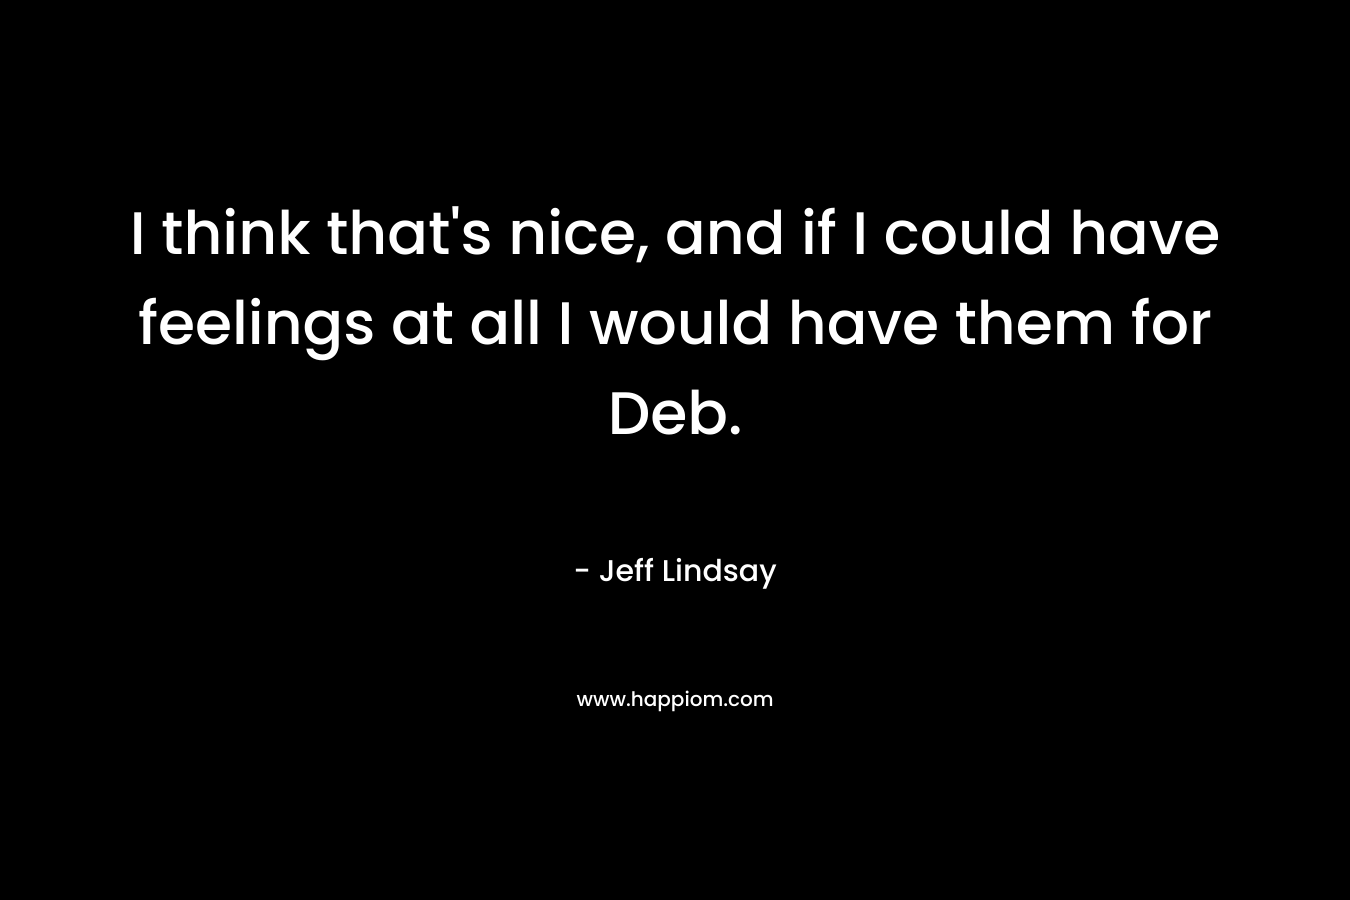 I think that’s nice, and if I could have feelings at all I would have them for Deb. – Jeff Lindsay